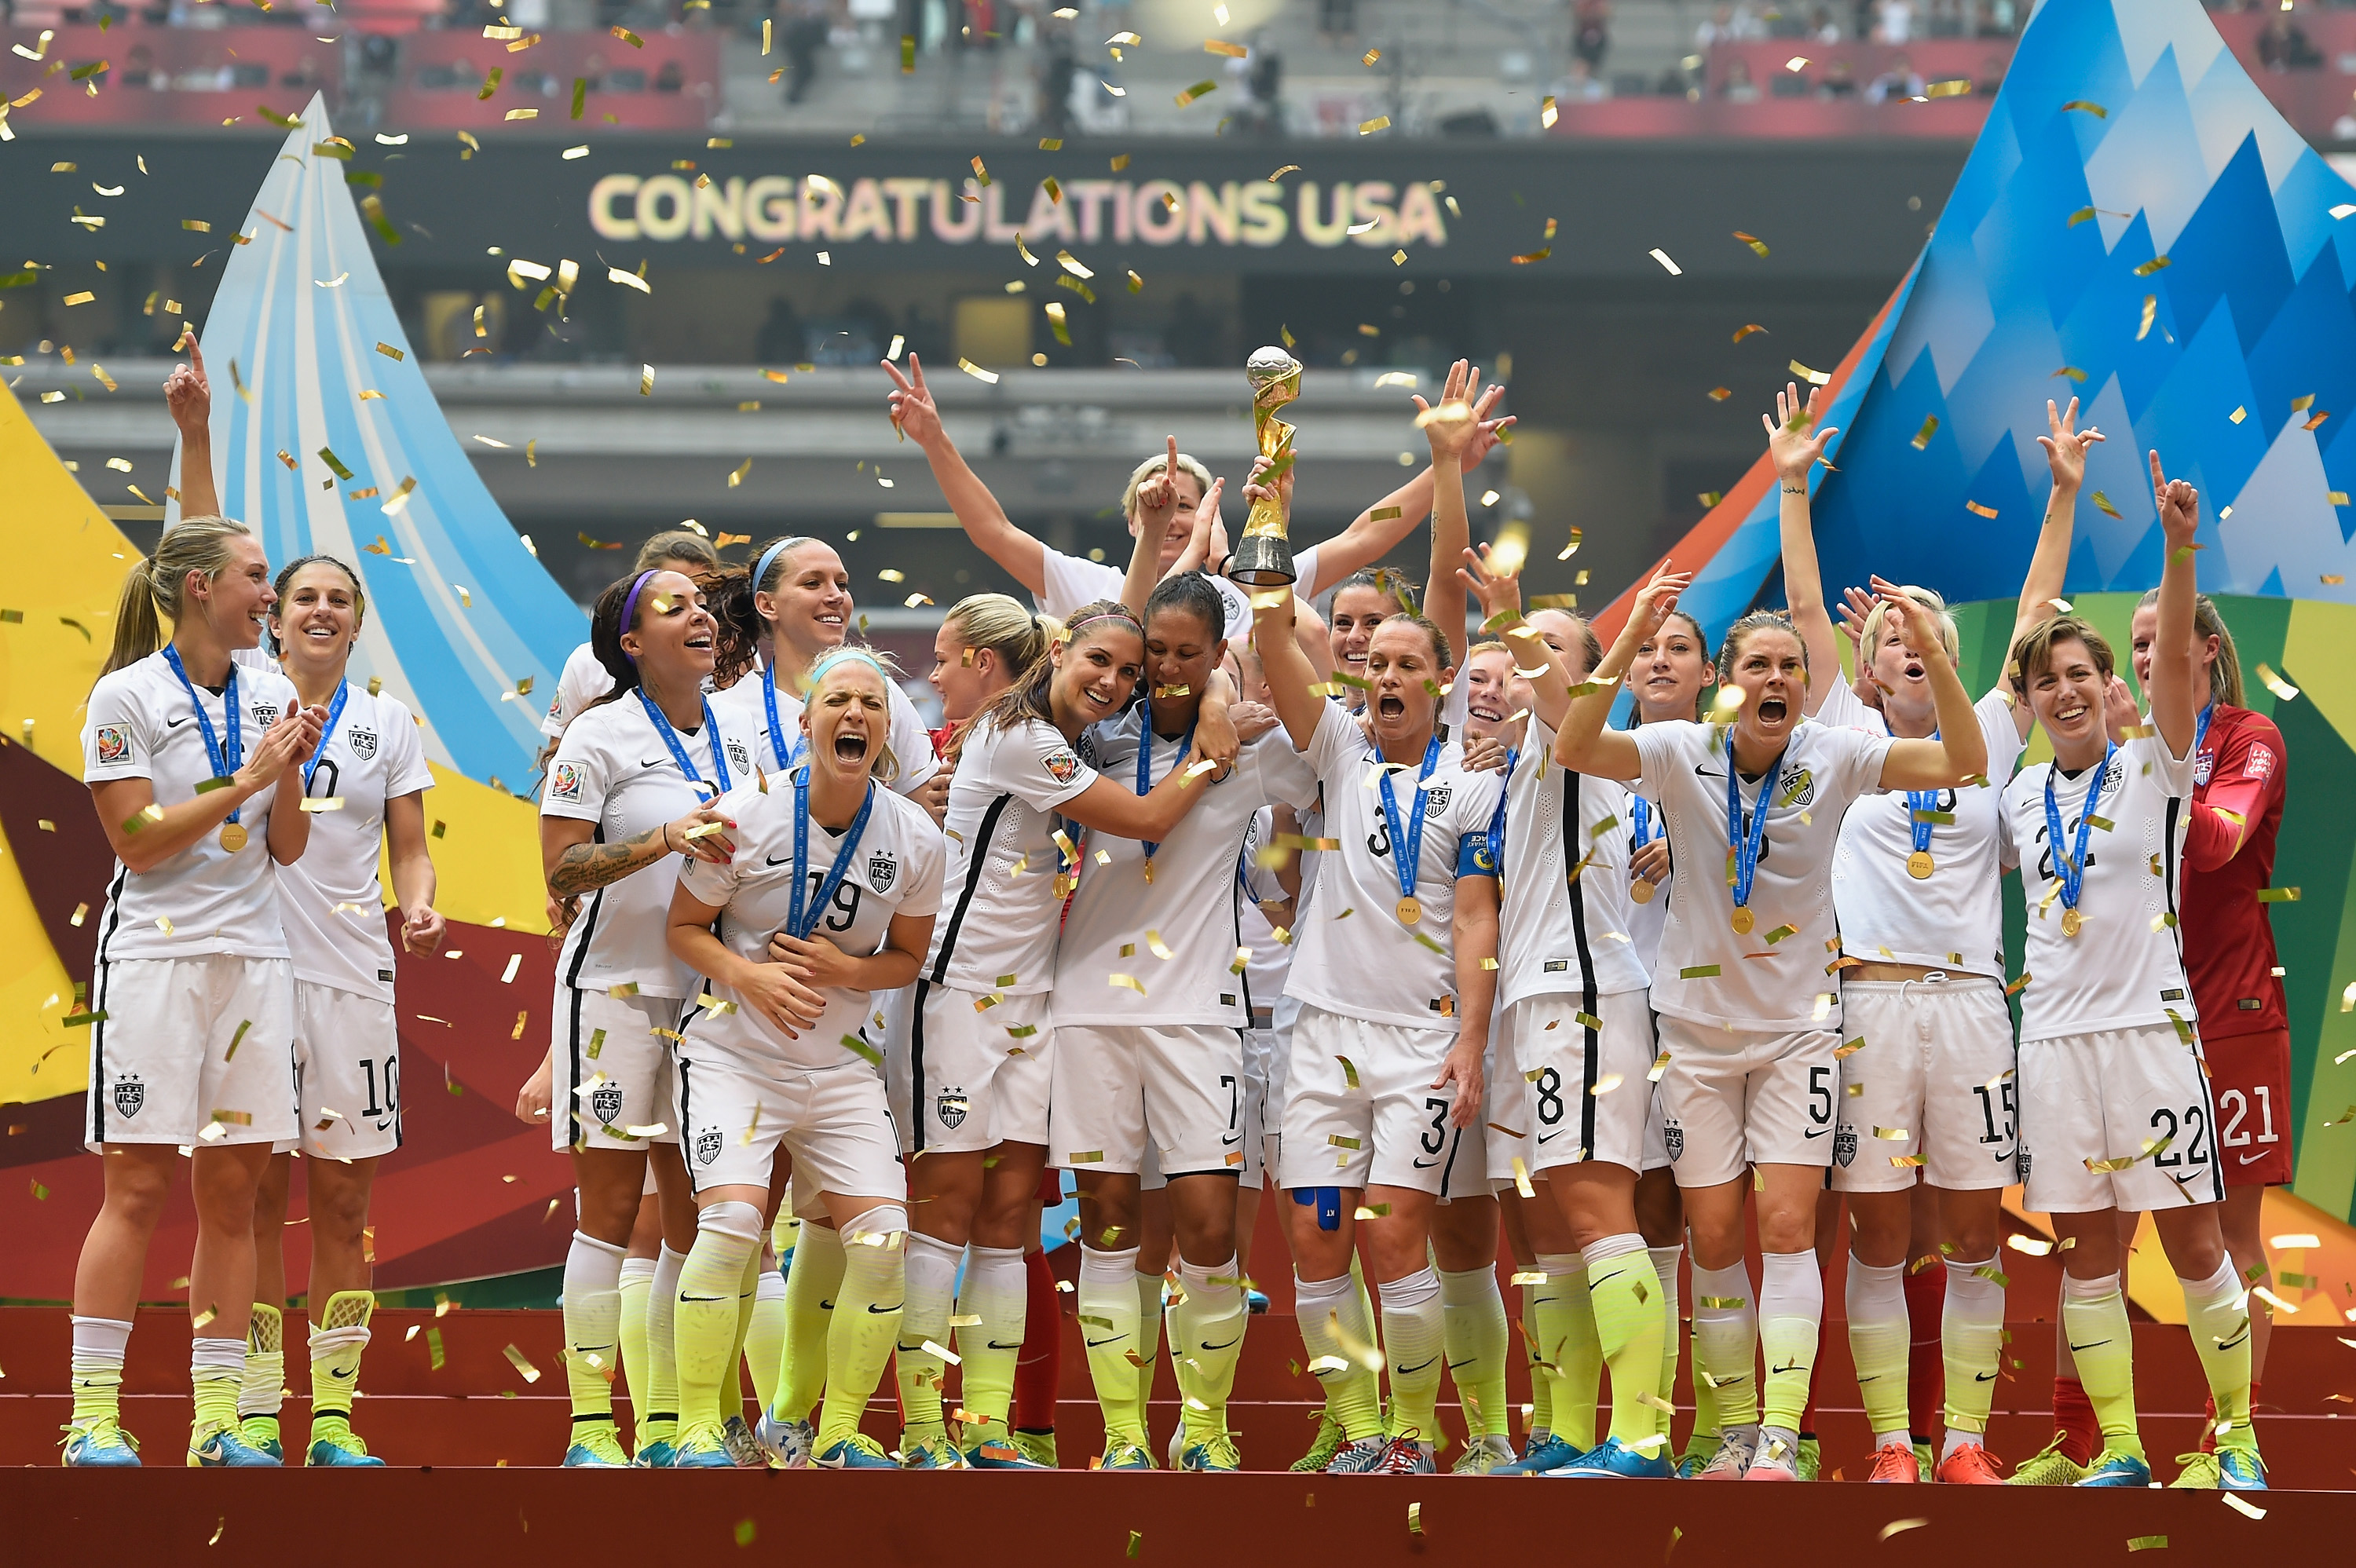 The USA team celebrates victory in the FIFA Women's World Cup 2015 Final between USA and Japan at BC Place Stadium on July 5, 2015 in Vancouver. (Mike Hewitt—FIFA/Getty Images)